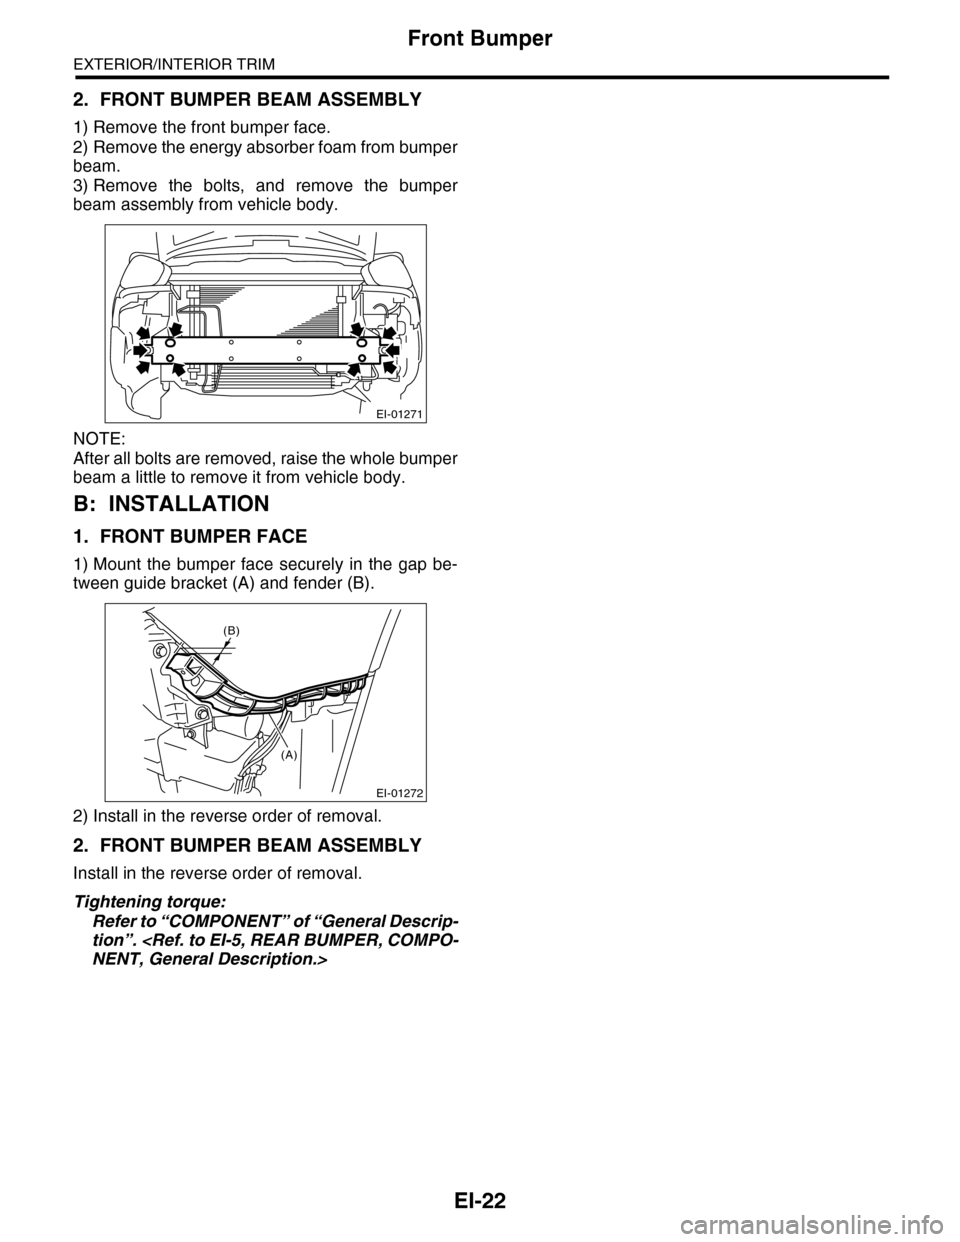 SUBARU TRIBECA 2009 1.G Service Workshop Manual EI-22
Front Bumper
EXTERIOR/INTERIOR TRIM
2. FRONT BUMPER BEAM ASSEMBLY
1) Remove the front bumper face. 
2) Remove the energy absorber foam from bumper
beam.
3) Remove  the  bolts,  and  remove  the 